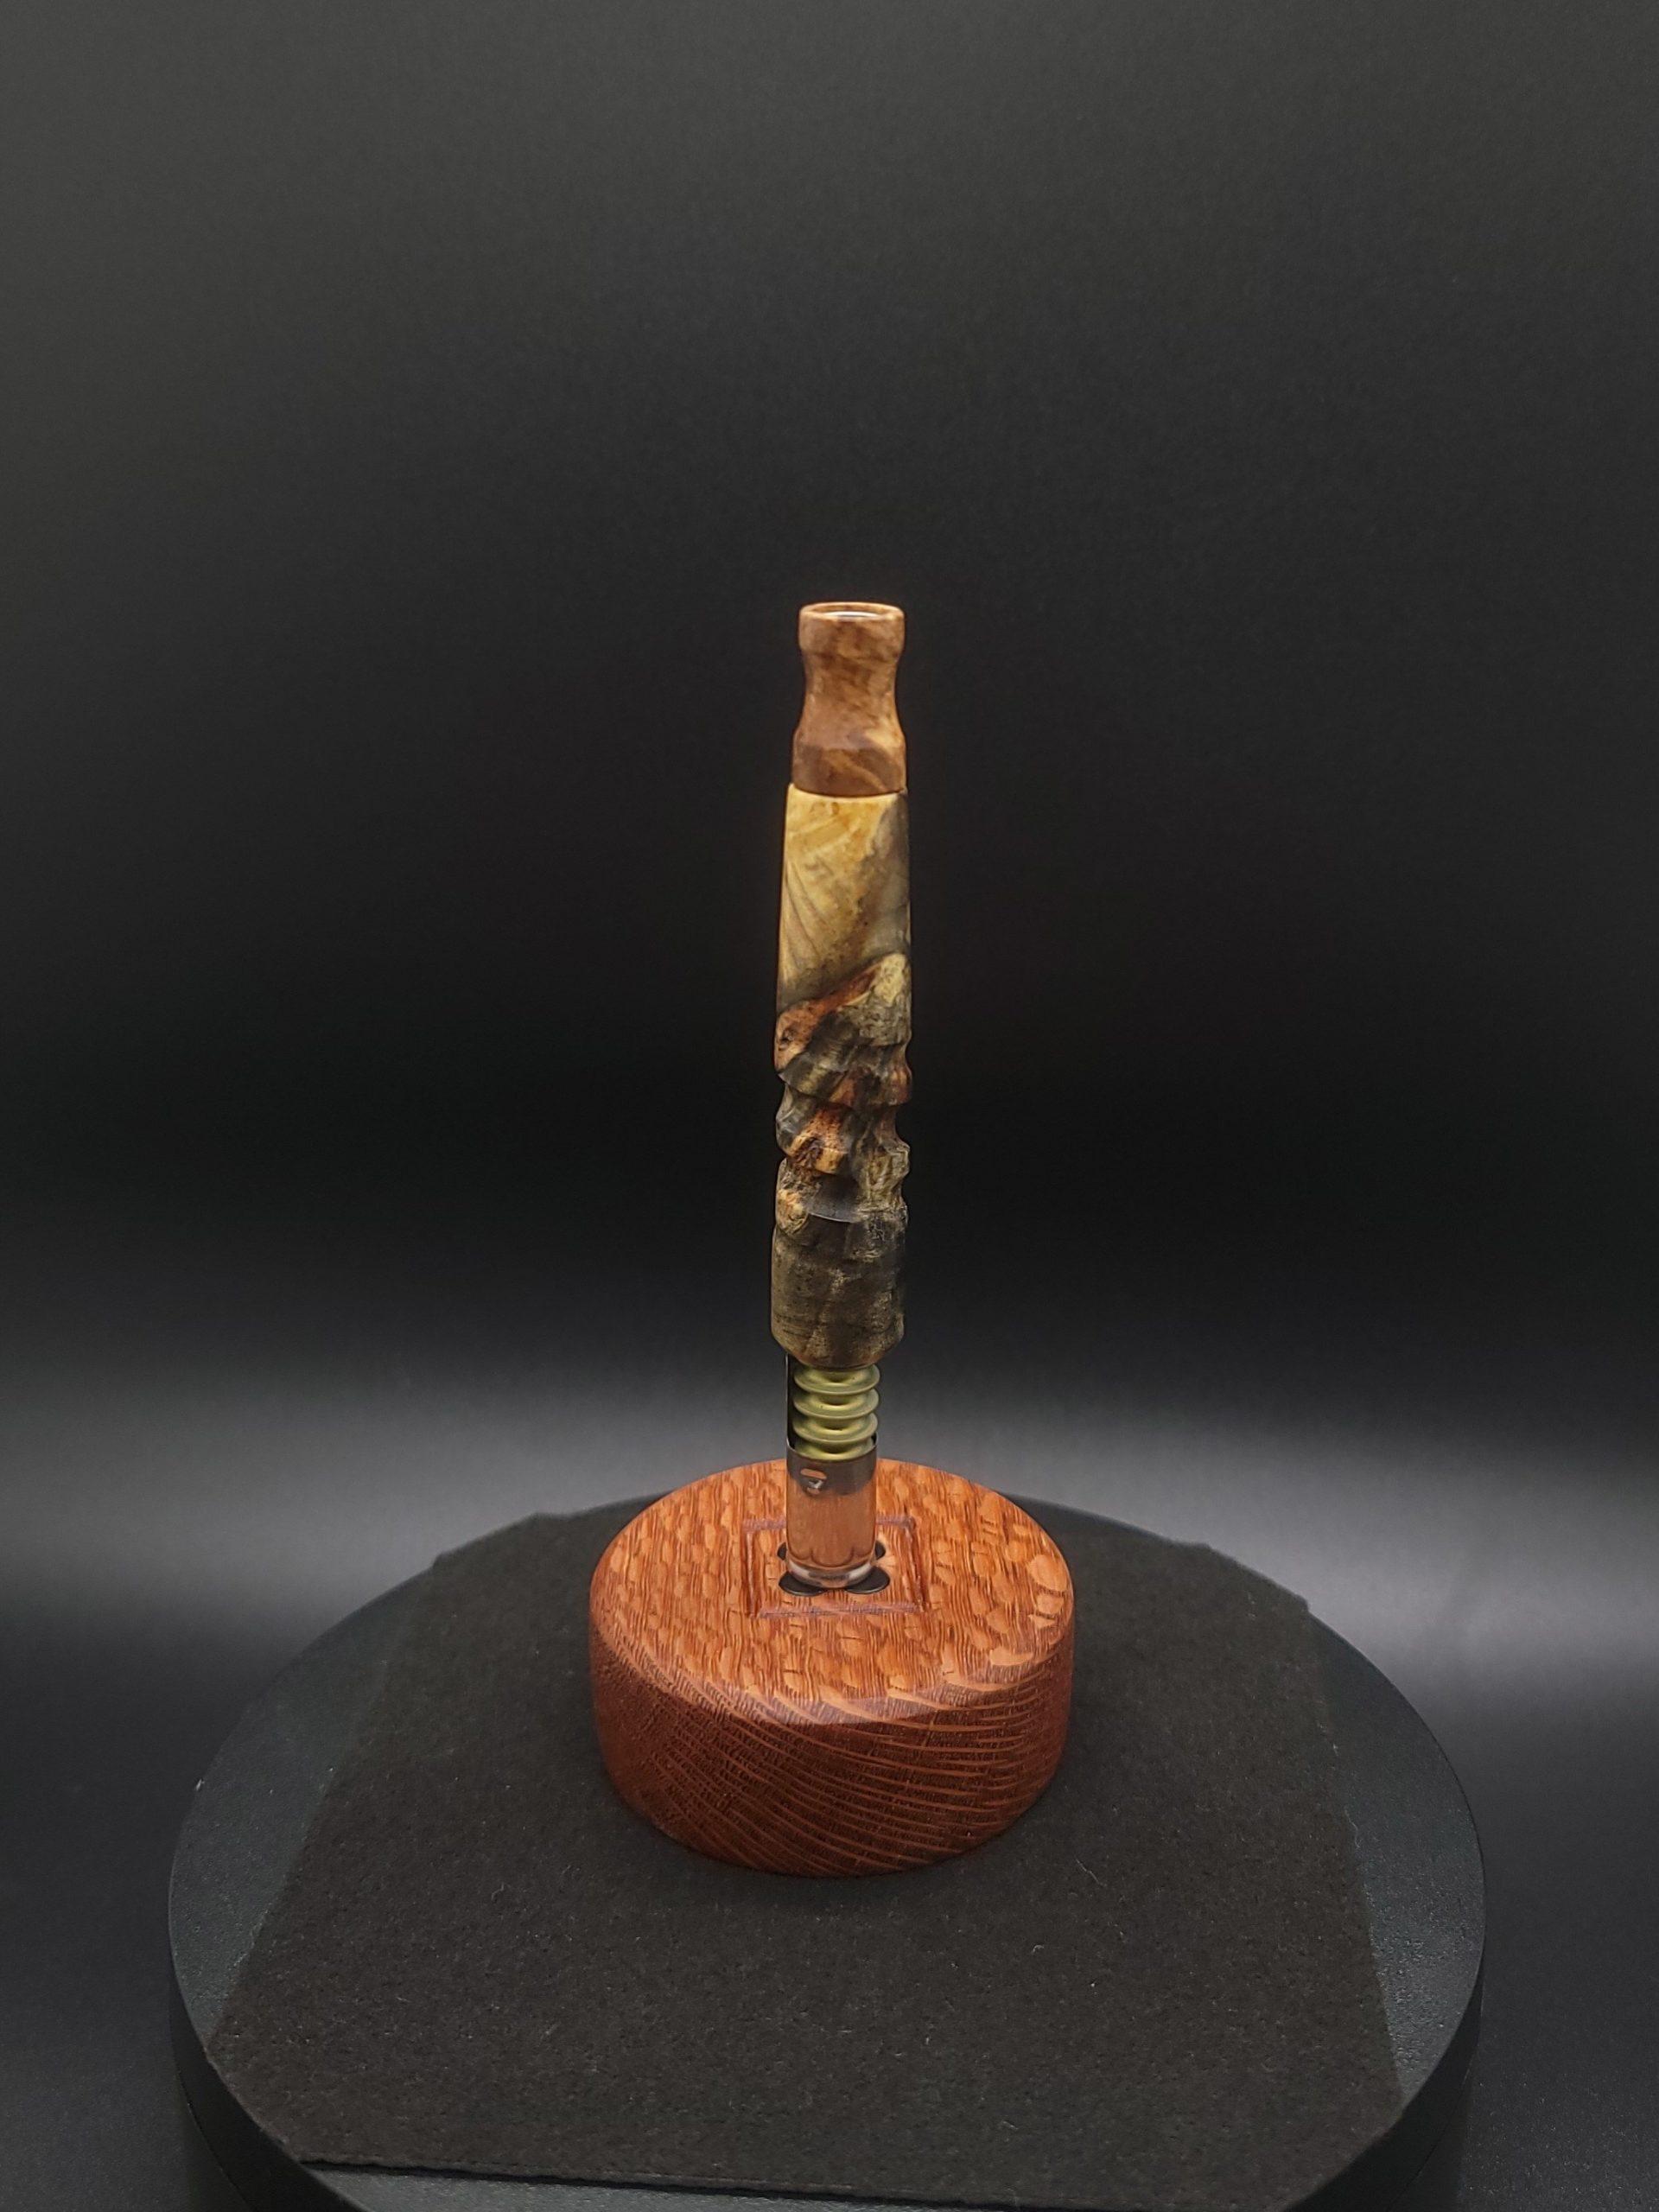 This image portrays The Downward Spiral-Buckeye Burl-Dynavap Stem-NEW! by Dovetail Woodwork.